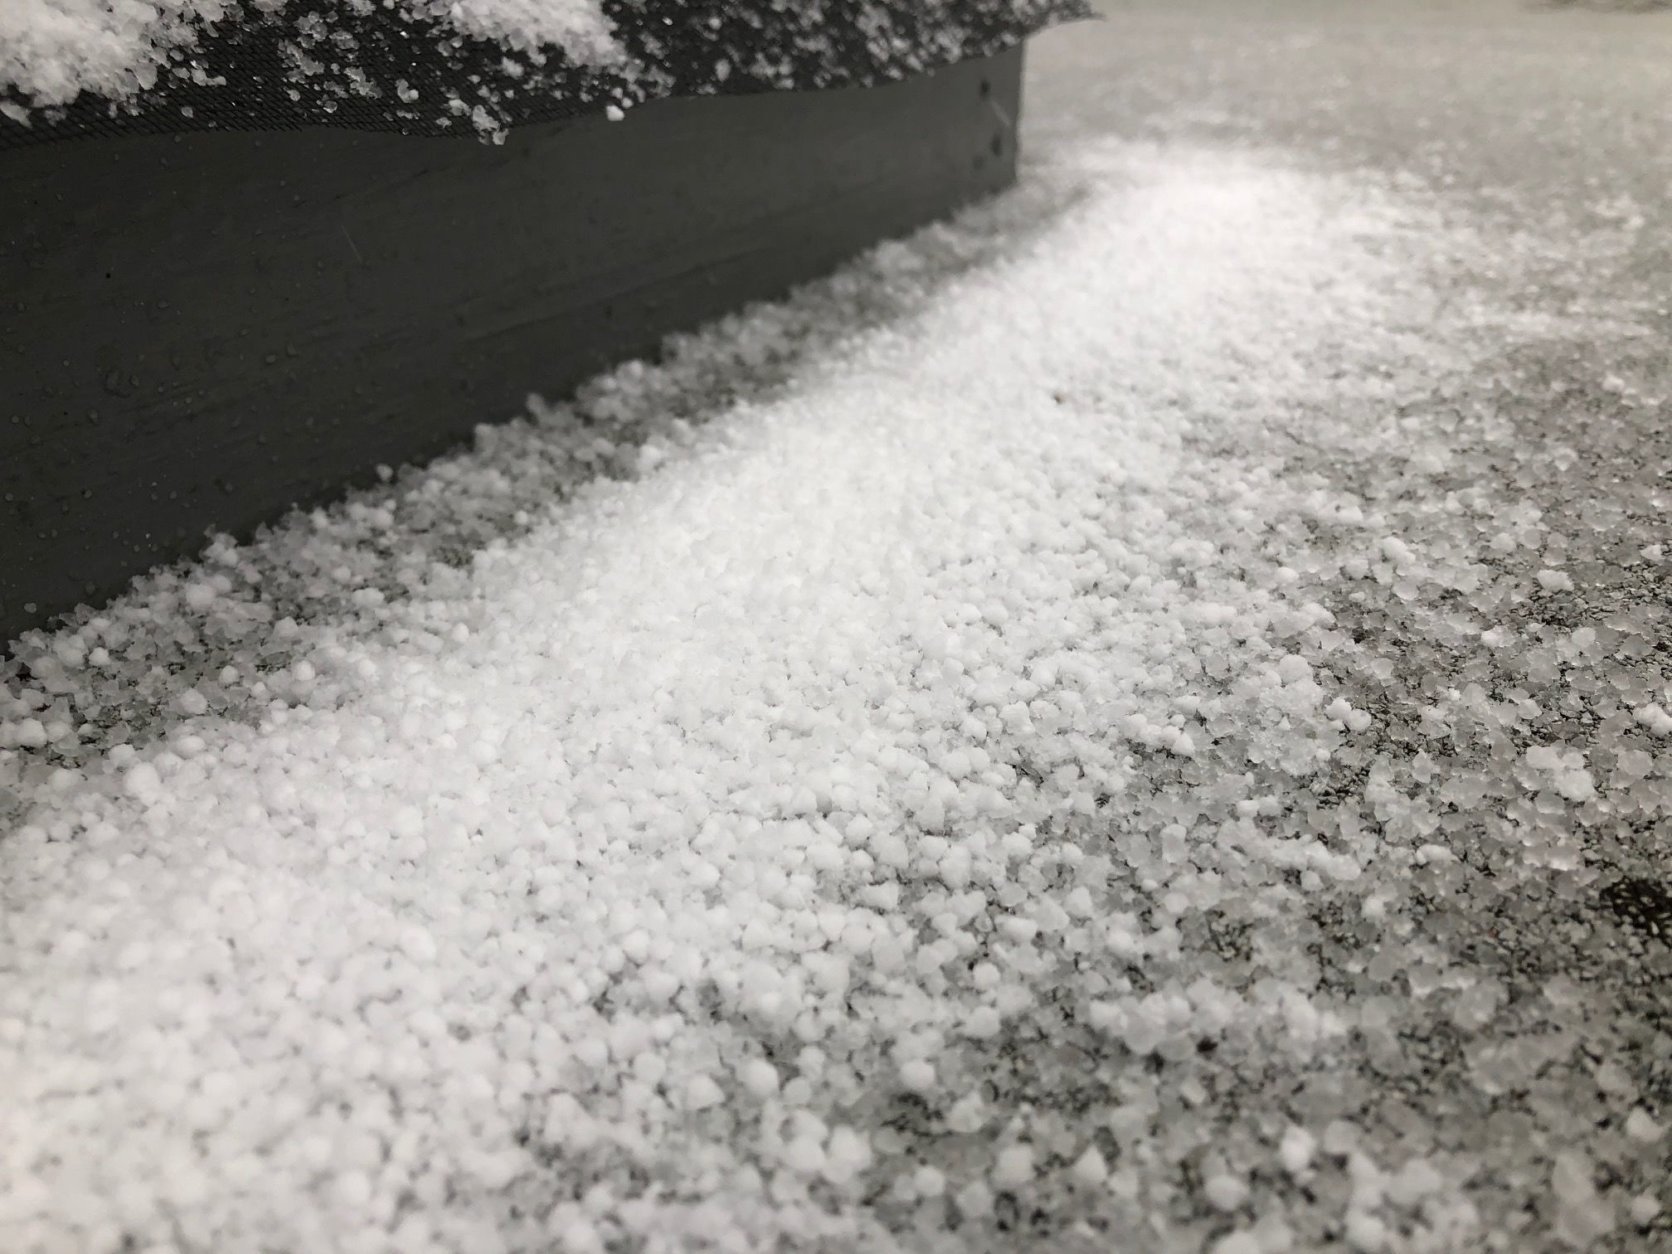 Graupel falls on a roof in Tenleytown, D.C. (WTOP/Dave Dildine)